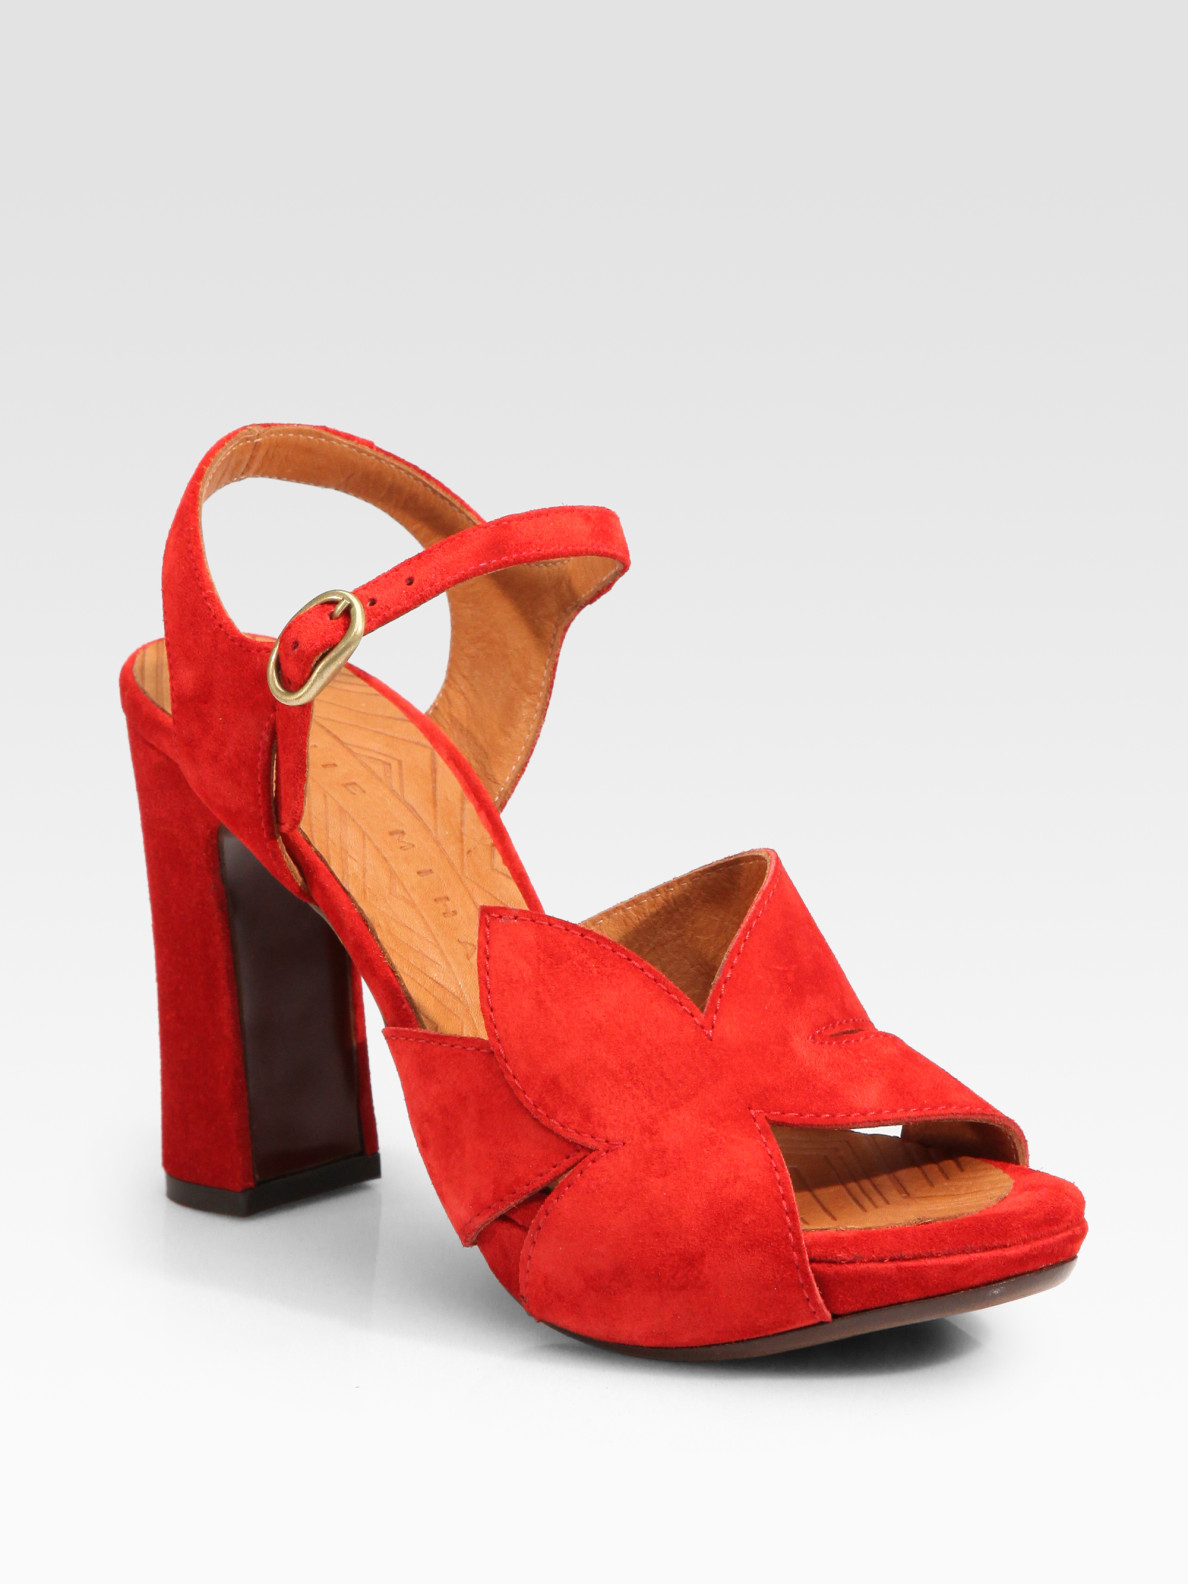 Chie Mihara Ross Suede Peep Toe Sandals in Red | Lyst